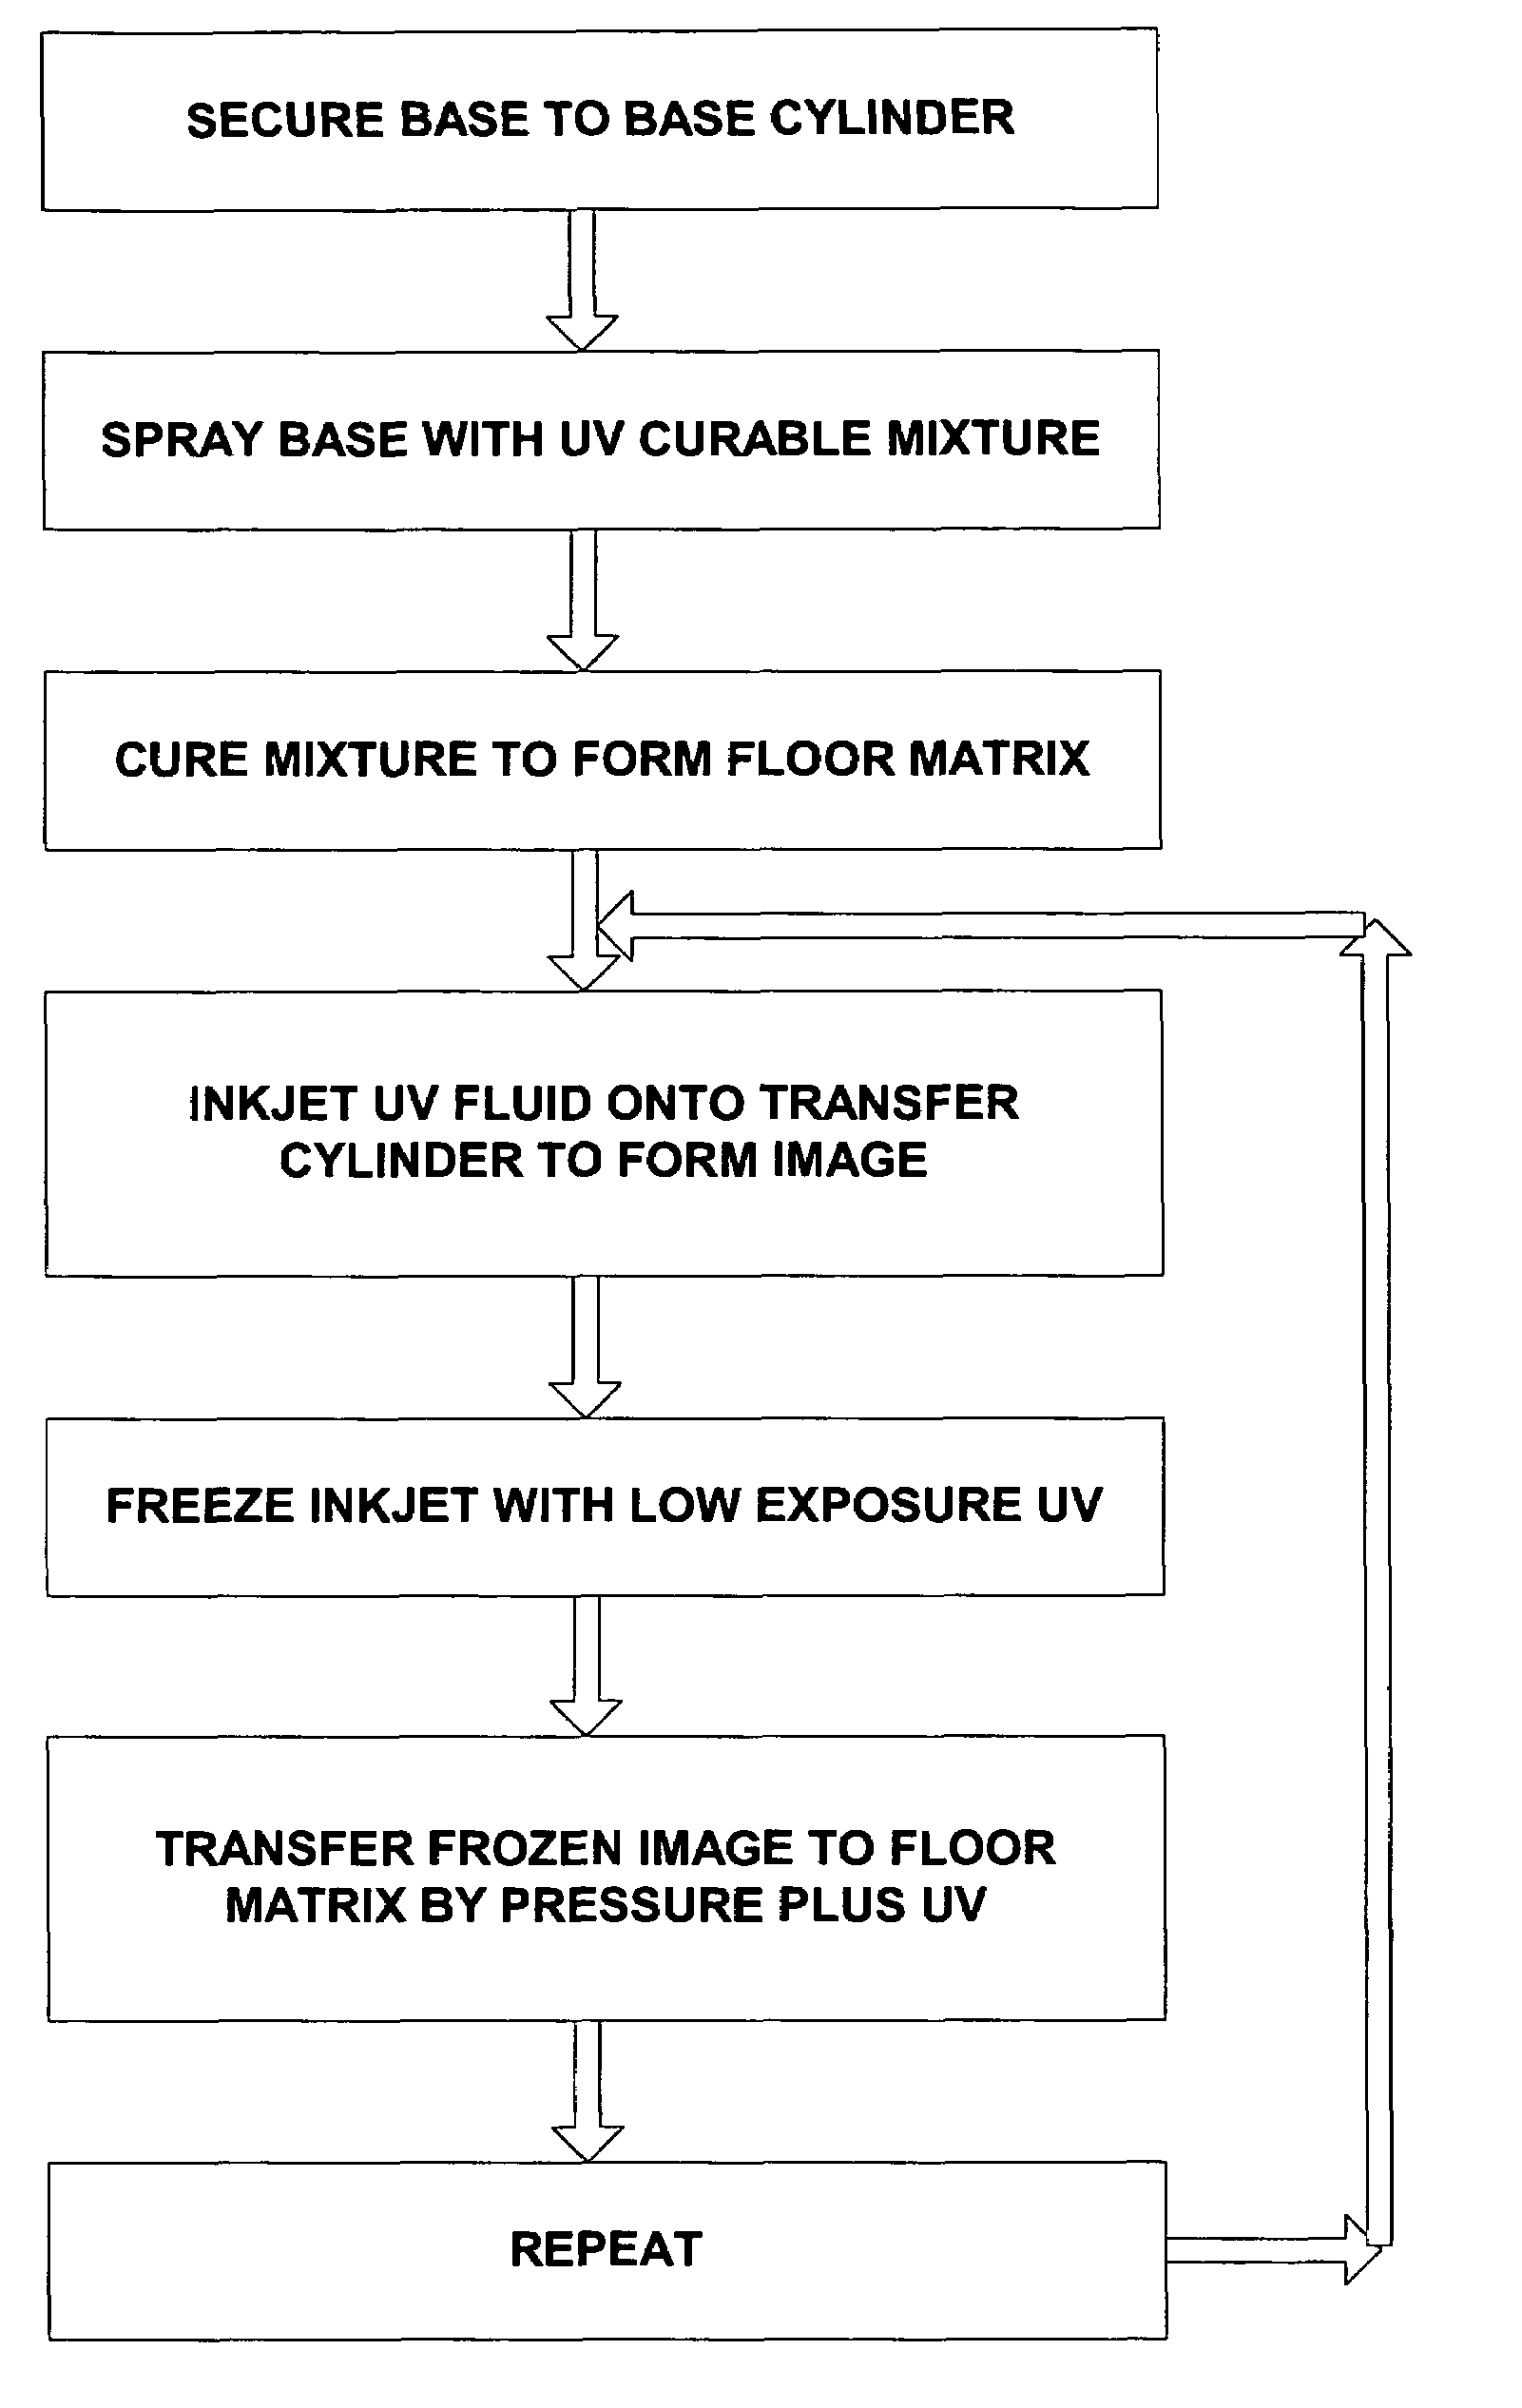 Method for producing a flexographic printing plate formed by inkjetted fluid